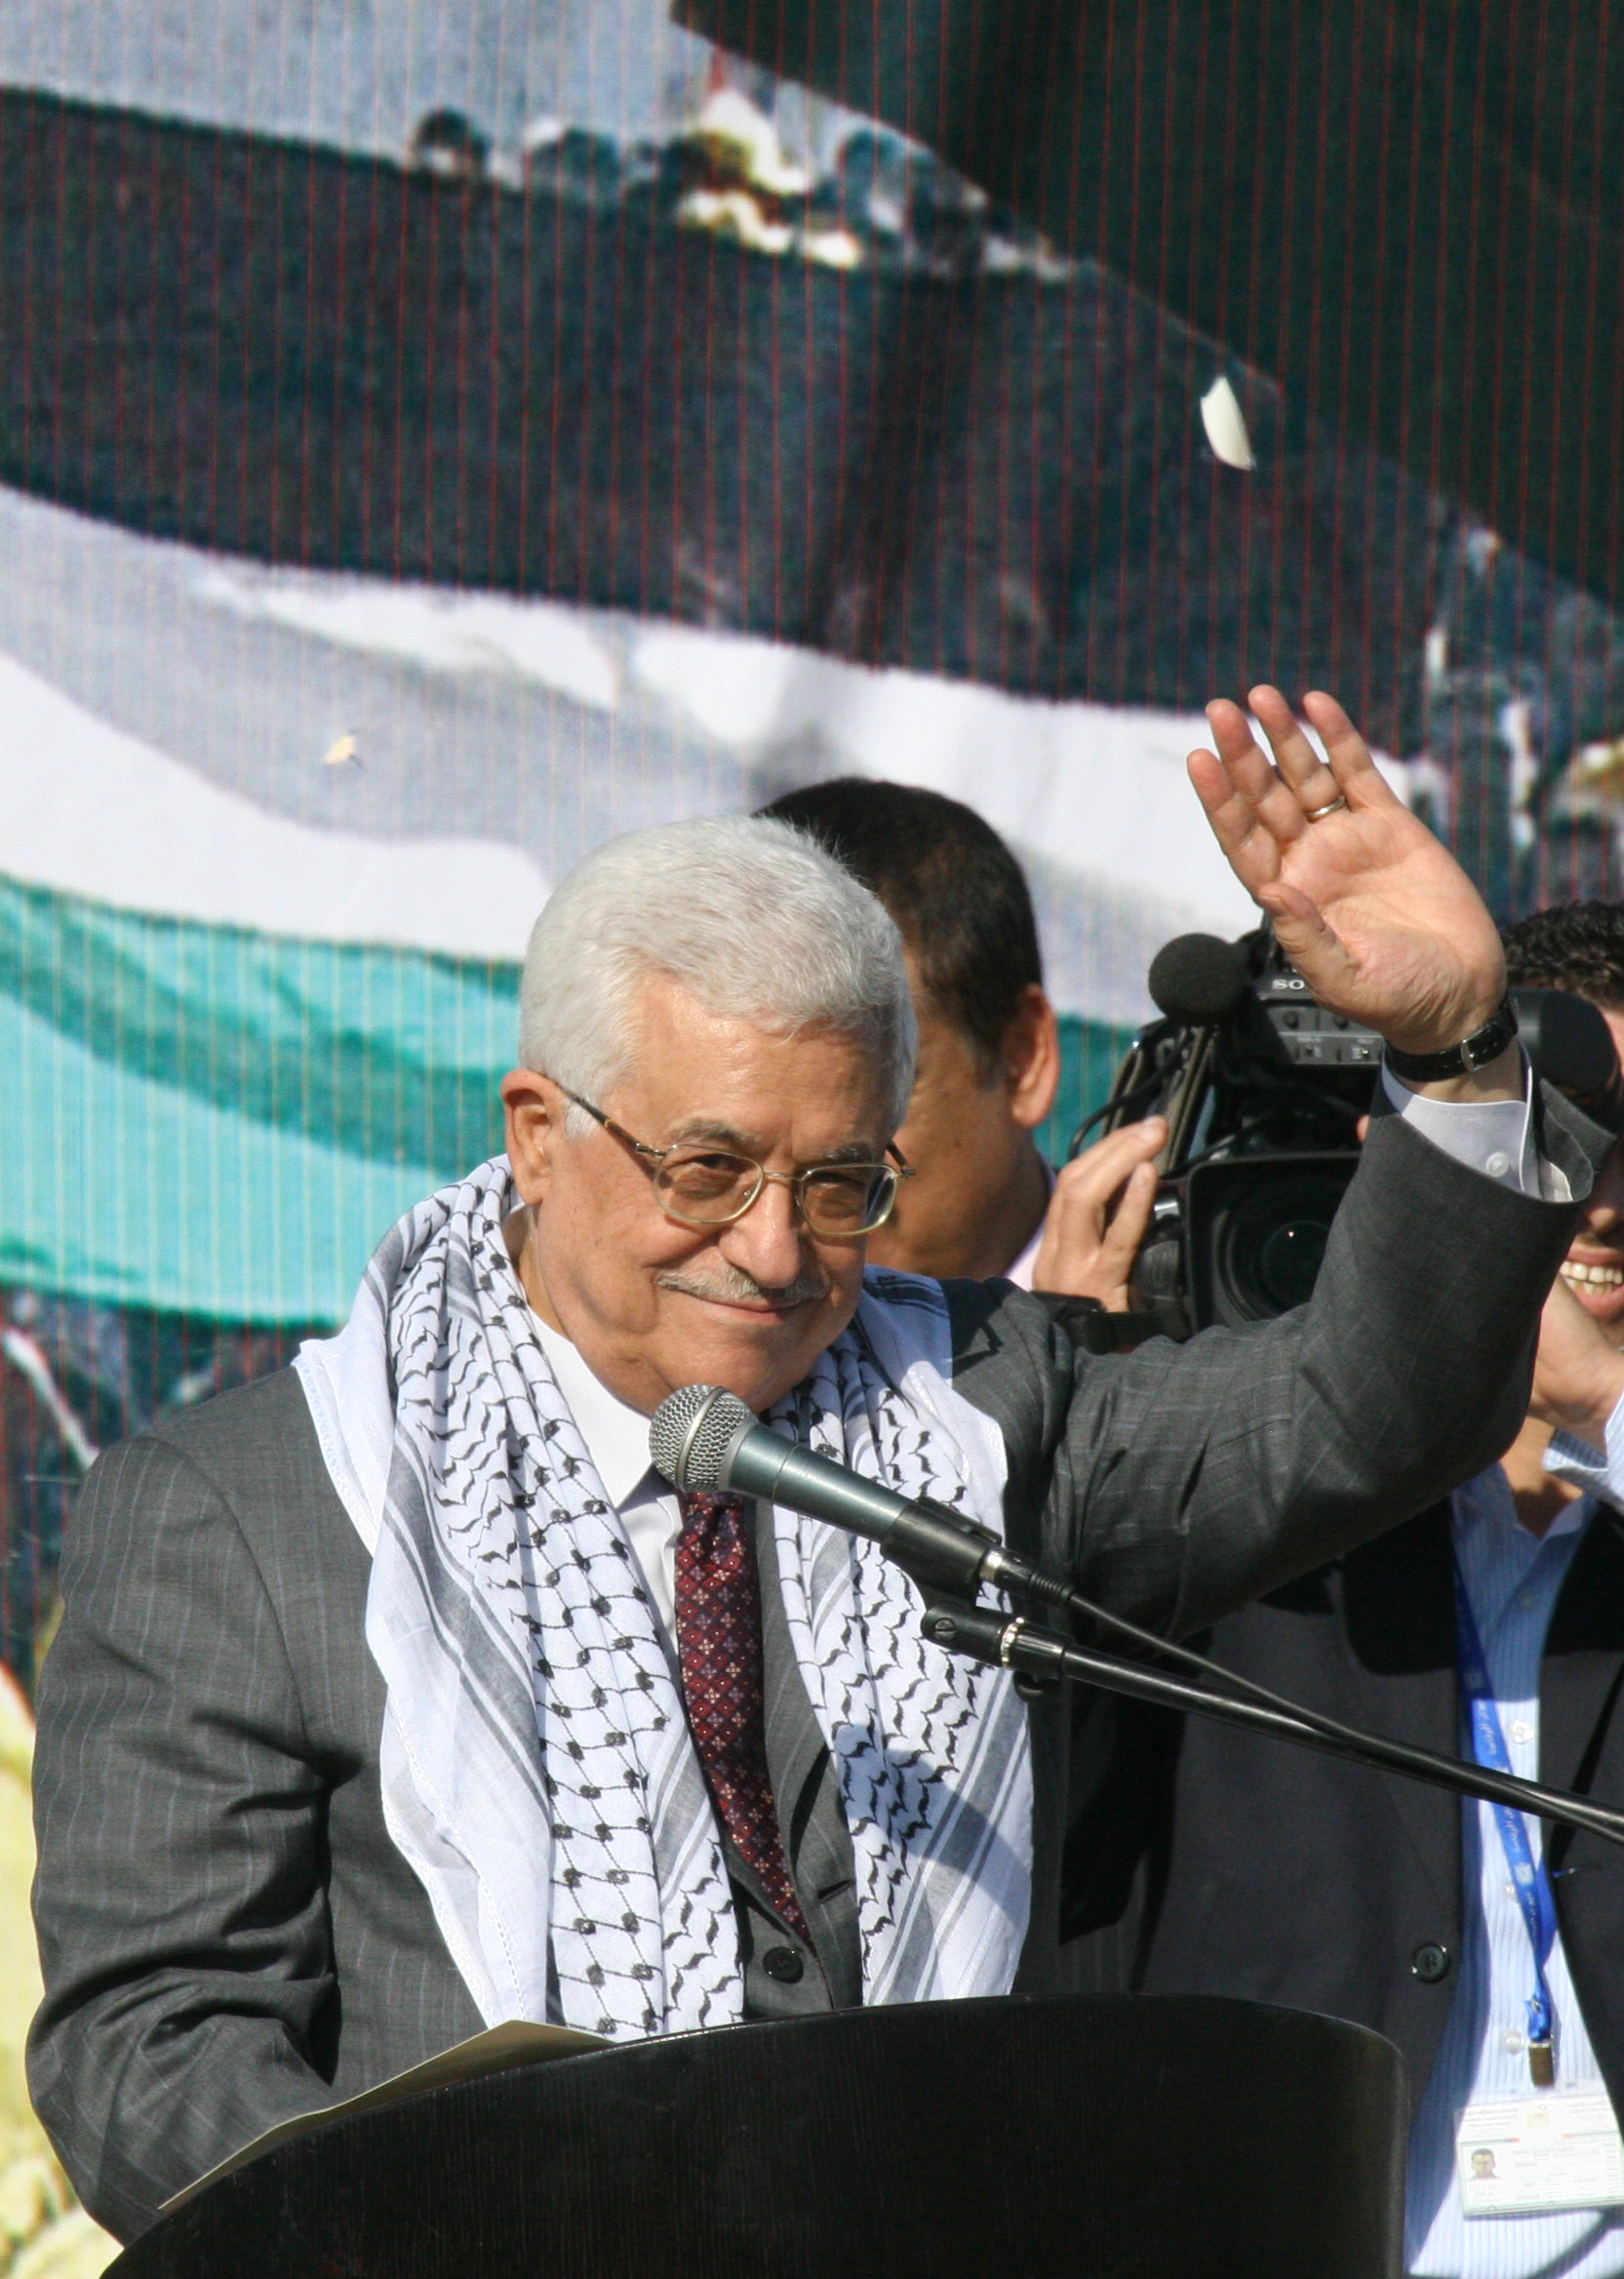 Officials, institutions speak in support of President Abbas, say campaign is aimed at him and Palestinian people